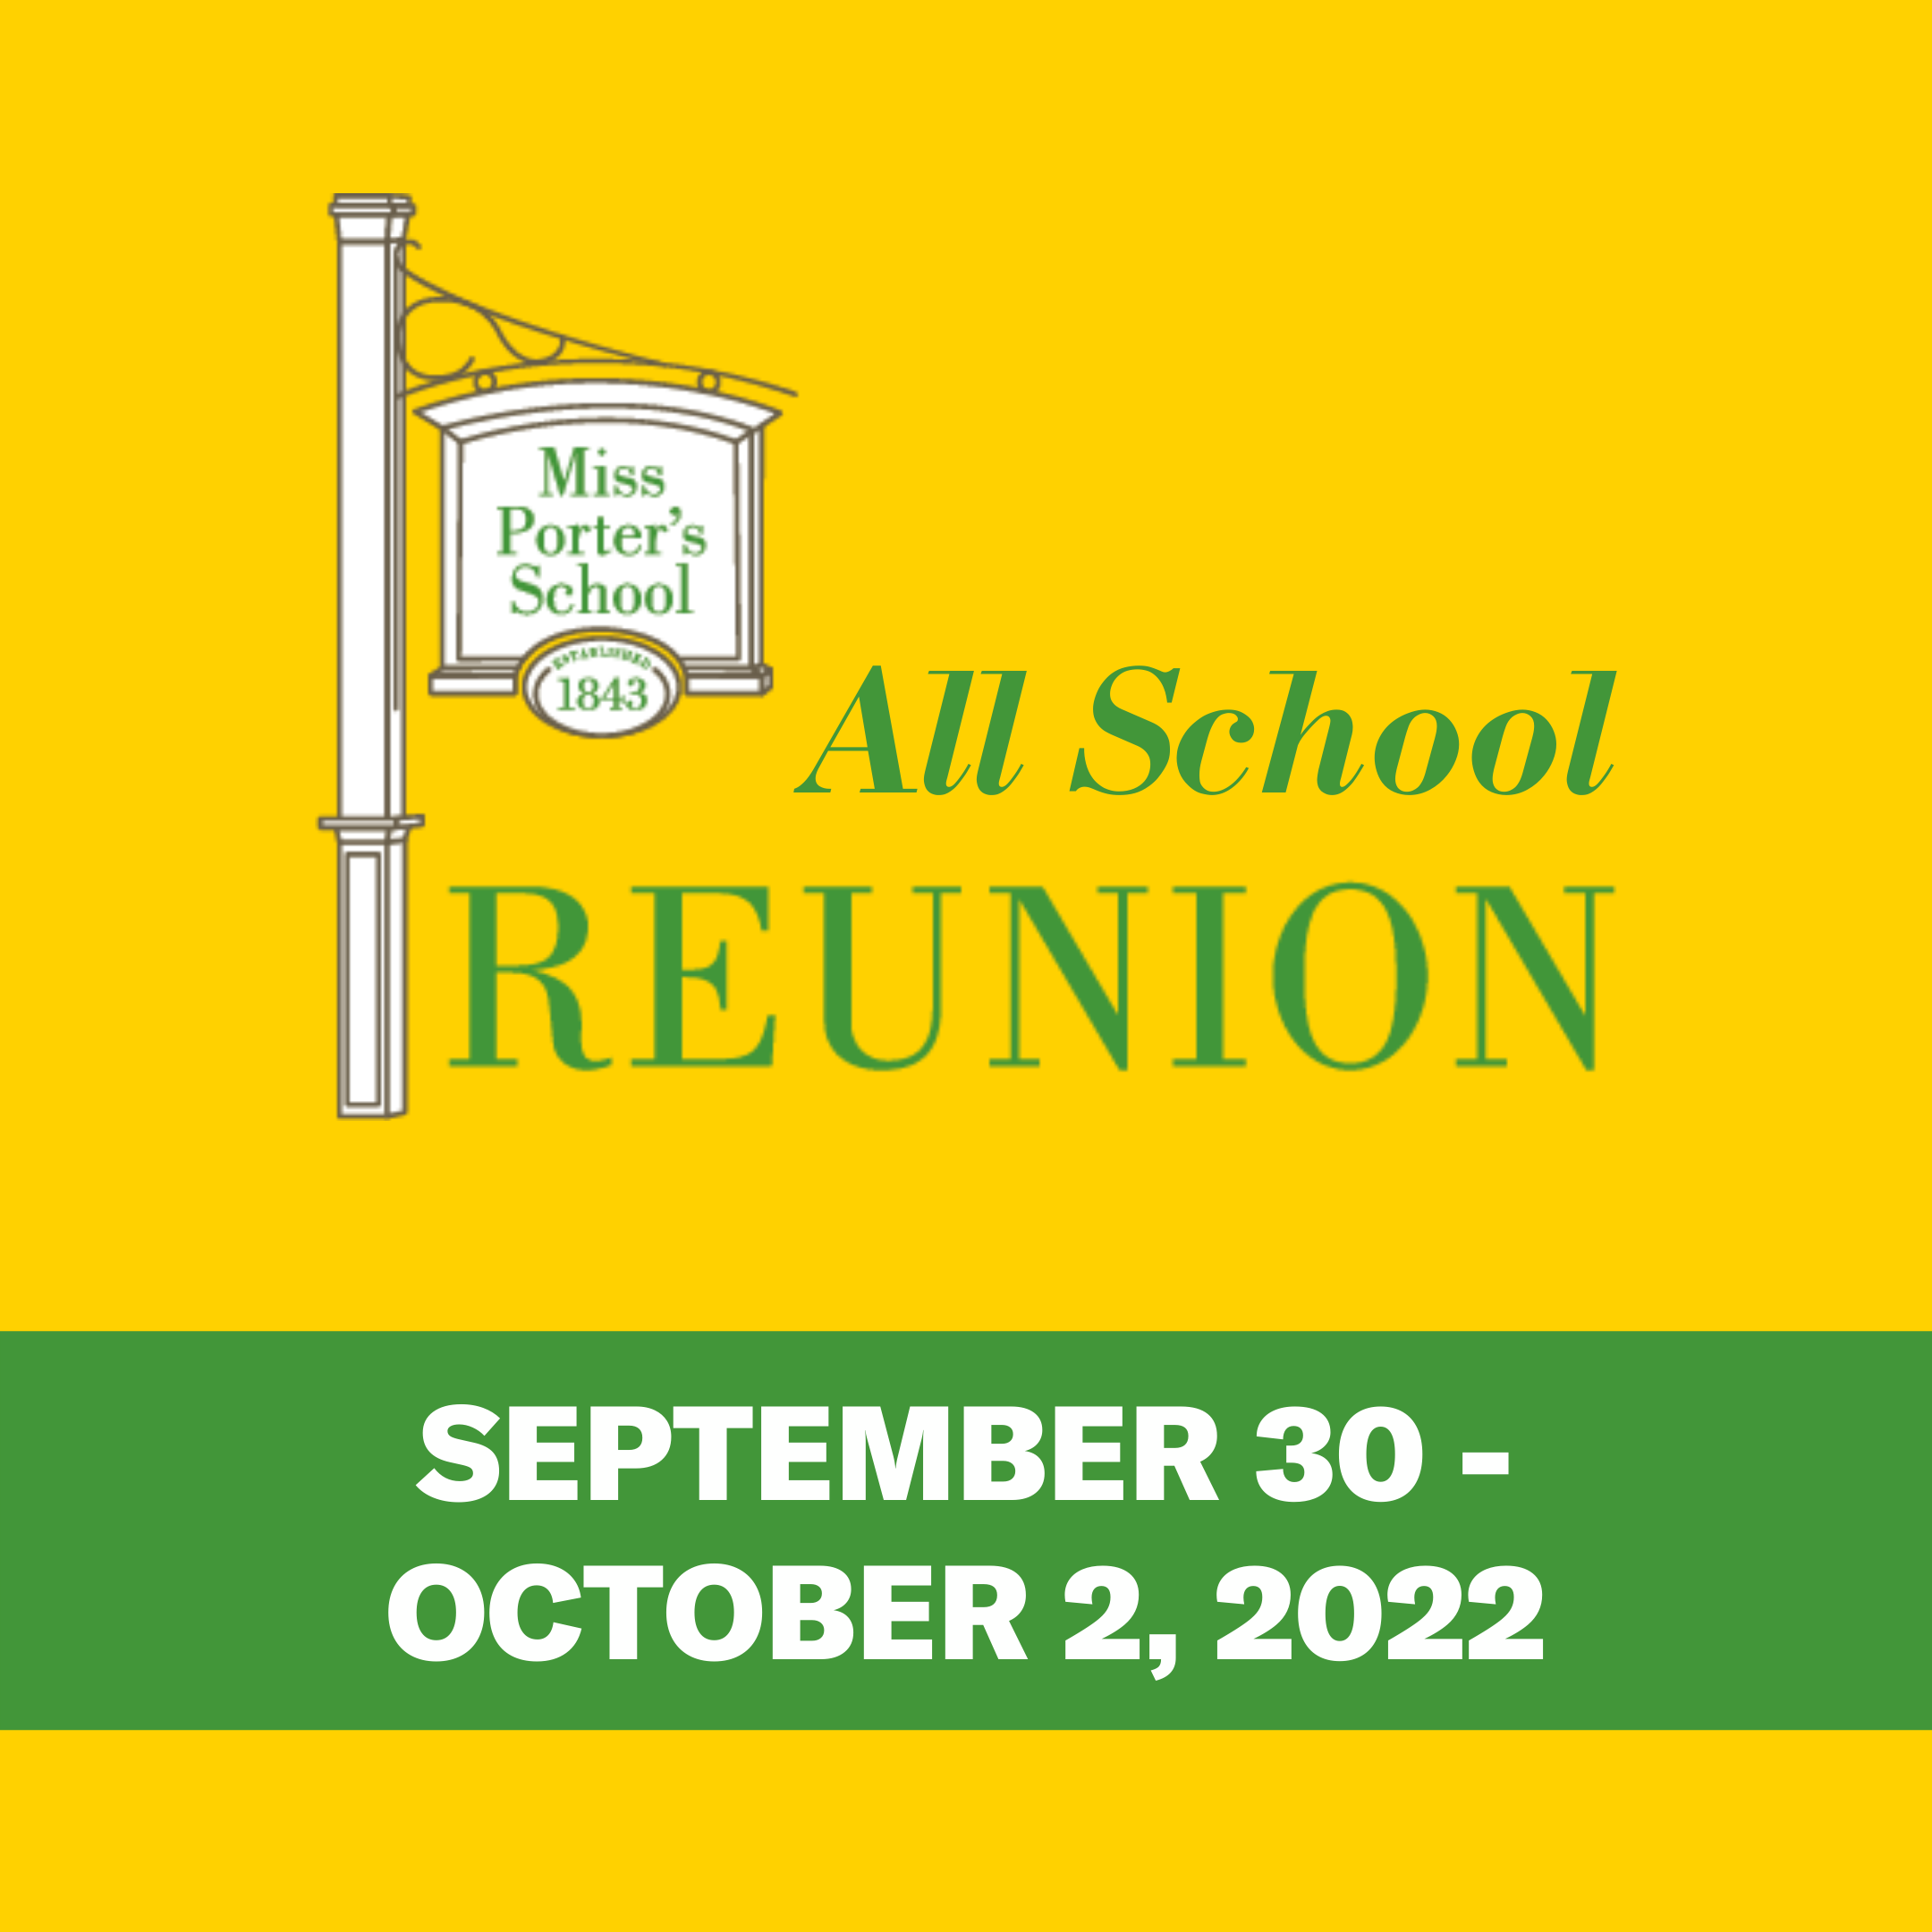 Save the Date for All School Reunion: September 30 to October 2, 2022